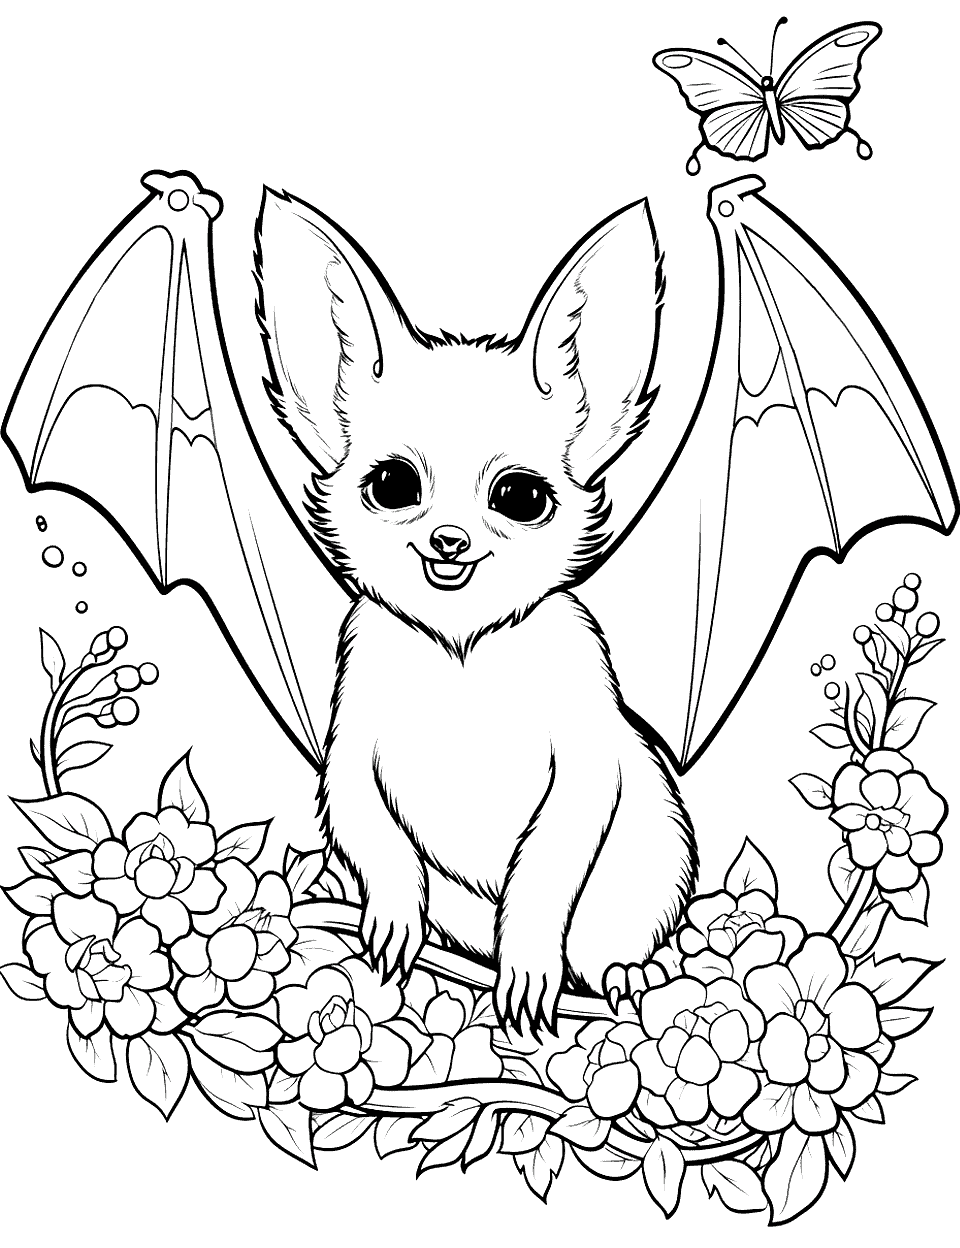 Bat Fox Hybrid Coloring Page - A bat mixed with a fox standing near night-blooming flowers and butterflies in a garden.